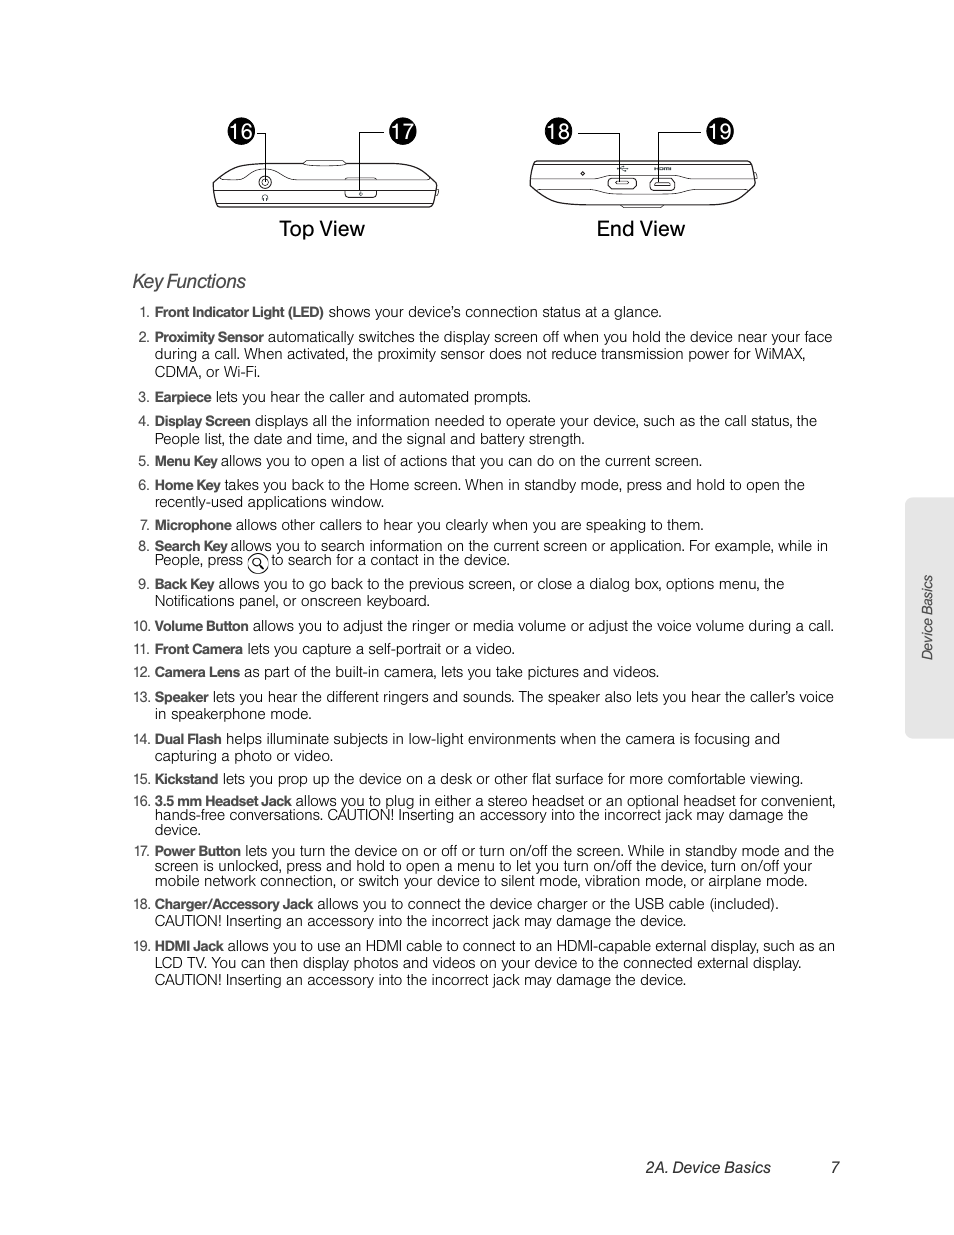 Your device, Key functions | HTC EVO 4G User Manual | Page 17 / 197